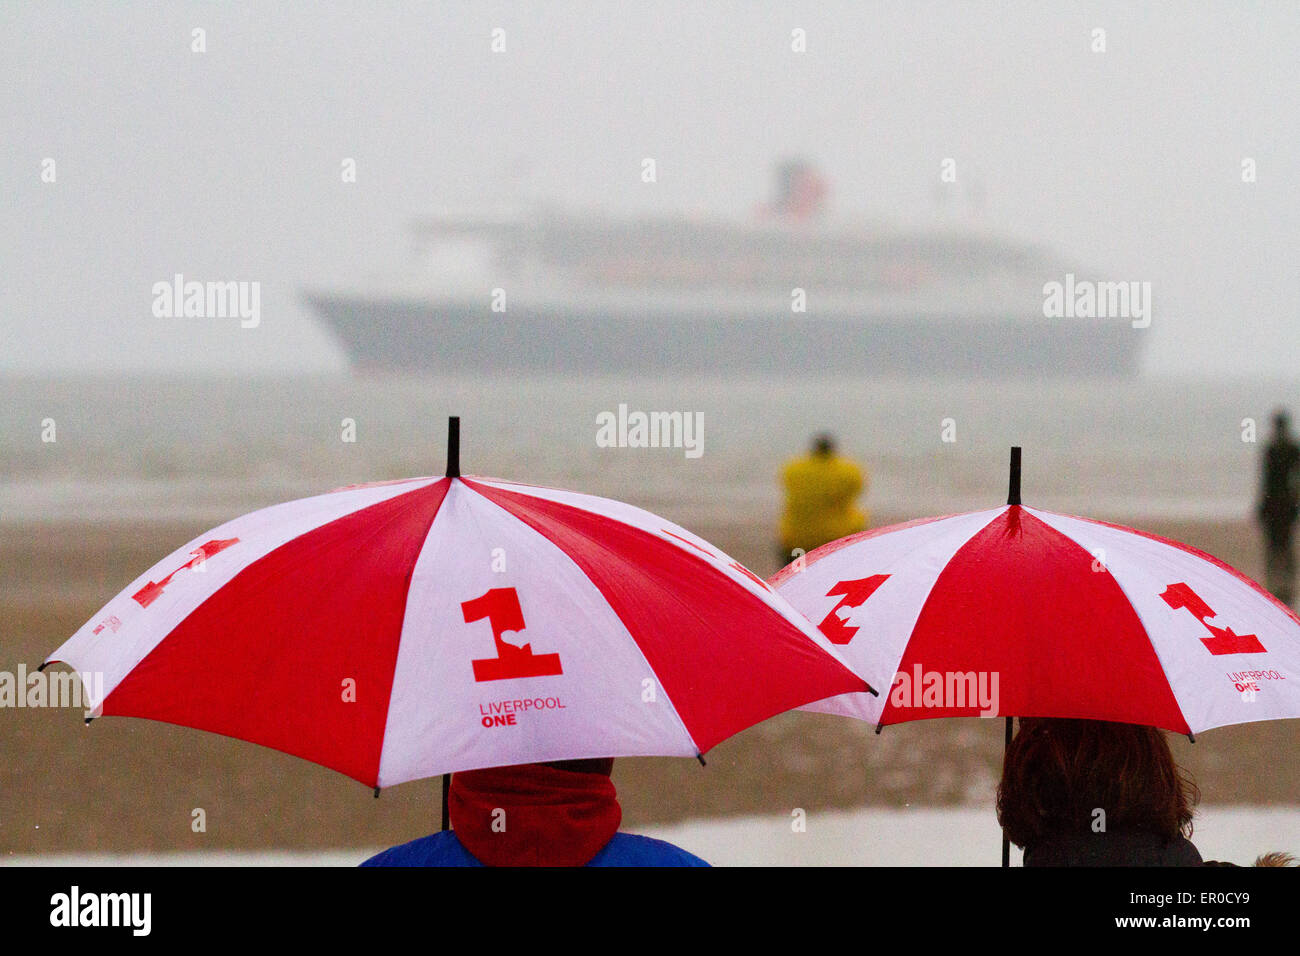 Golf umbrella, giant umbrellas in Liverpool, Merseyside, UK 24th May, 2015.  Cunard Queen Mary's arrival at dawn off Crosby Beach heralding the start of a stunning Three Queens celebration in the city. The flagship is the first of the company's three of luxury liners to arrive at Liverpool ahead of this Monday's celebrations which are expected to attract up to a million spectators. She will be joined by her two sister ships Queen Victoria and Queen Elizabeth in the following 24 hours for a sail past the city’s own three Queens to mark Cunard’s 175th birthday. Stock Photo